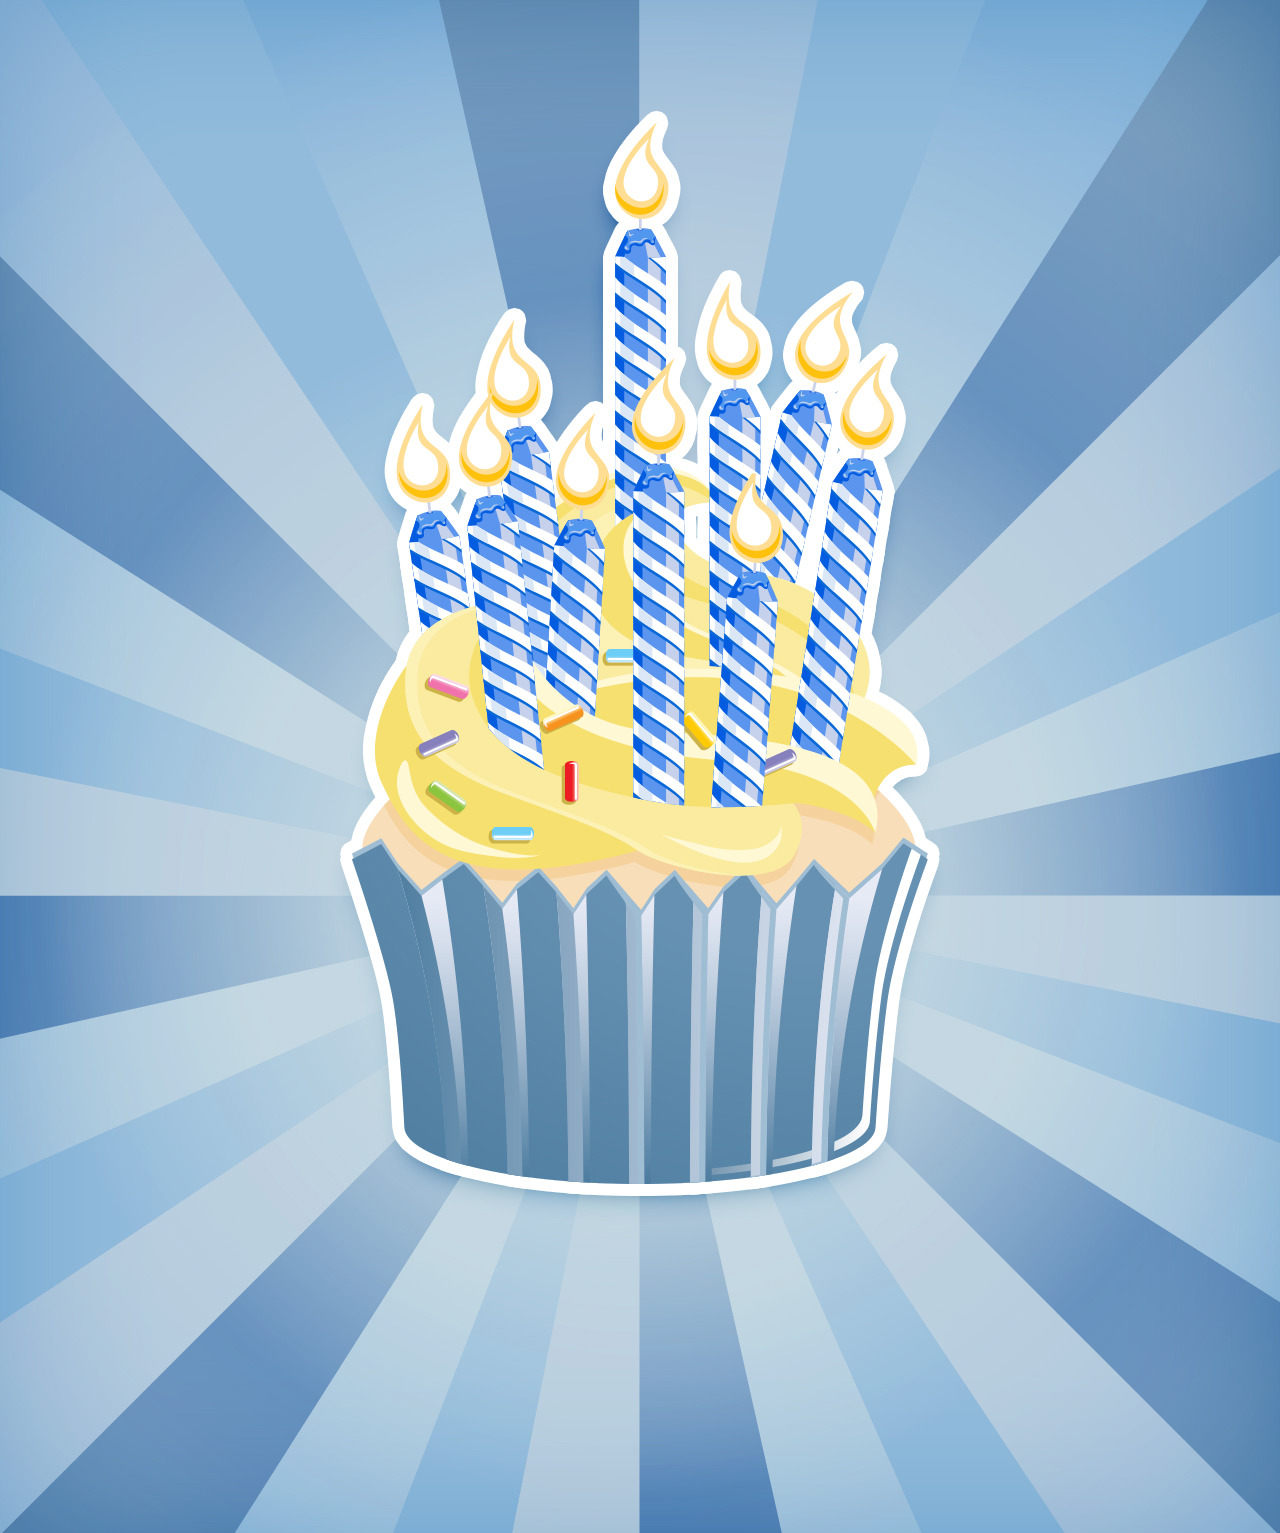 <p>My 80s Heaven blog turned 12 today. Can’t believe how the years fly by!</p>